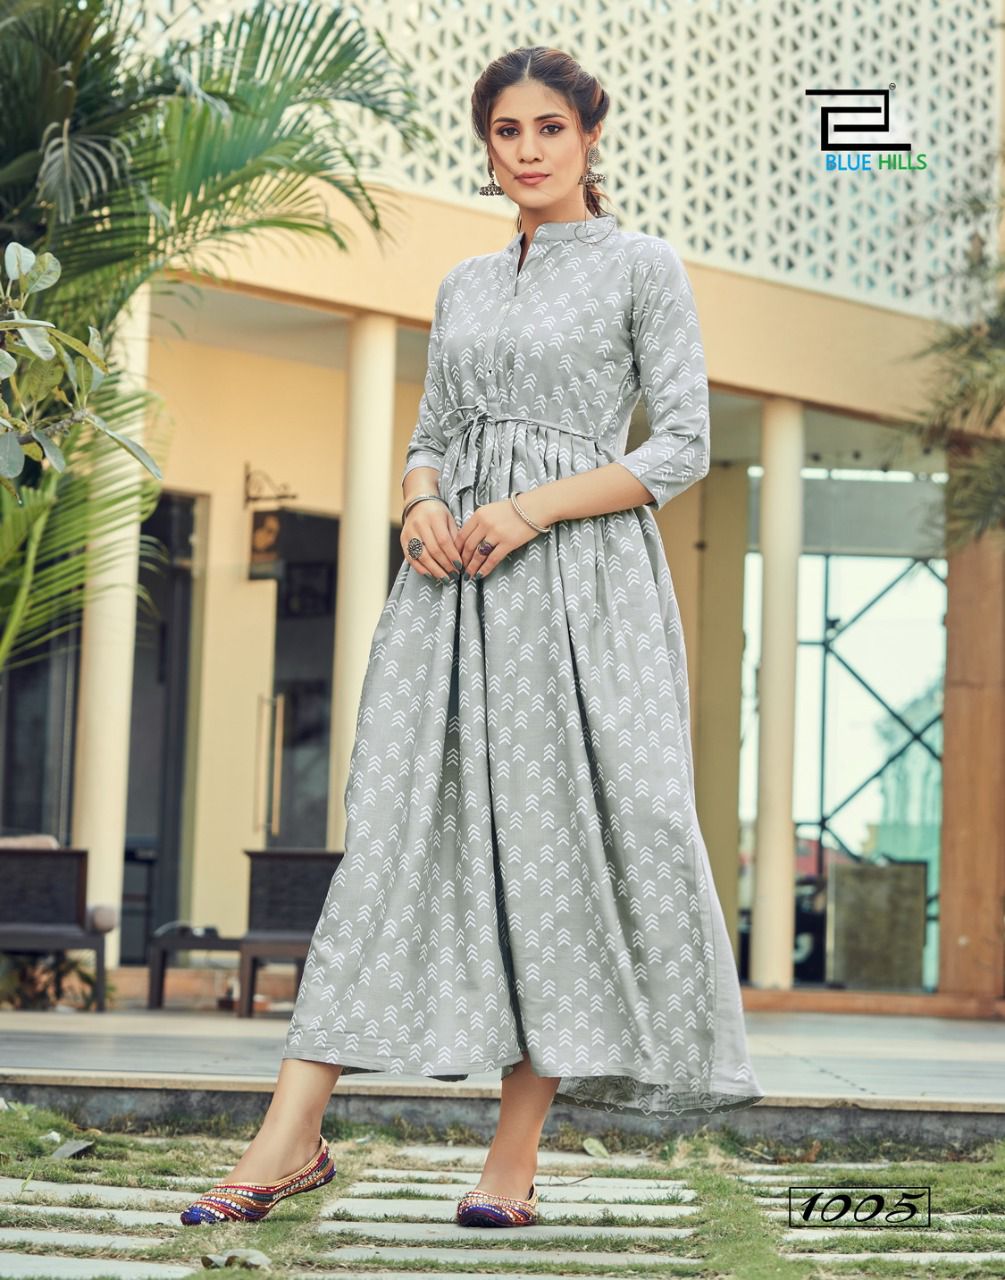 Yellow Long Cotton Kurti With Belt And Bell Sleeves | Latest Kurti Designs  | Long cotton kurti, Kurti designs latest, Cotton kurti designs